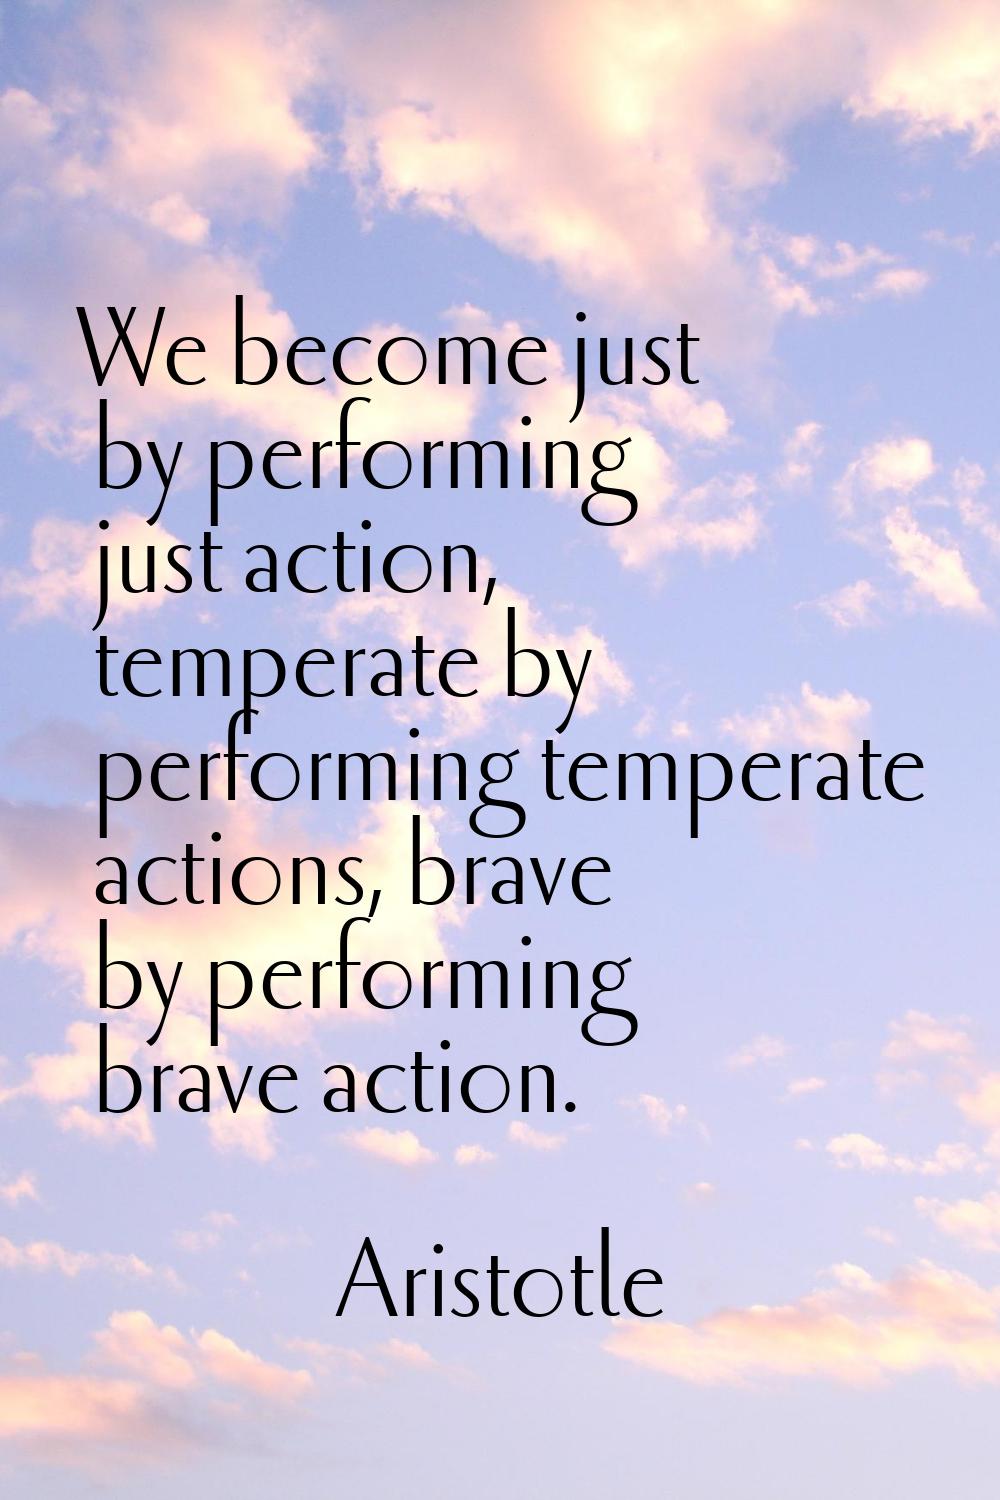 We become just by performing just action, temperate by performing temperate actions, brave by perfo